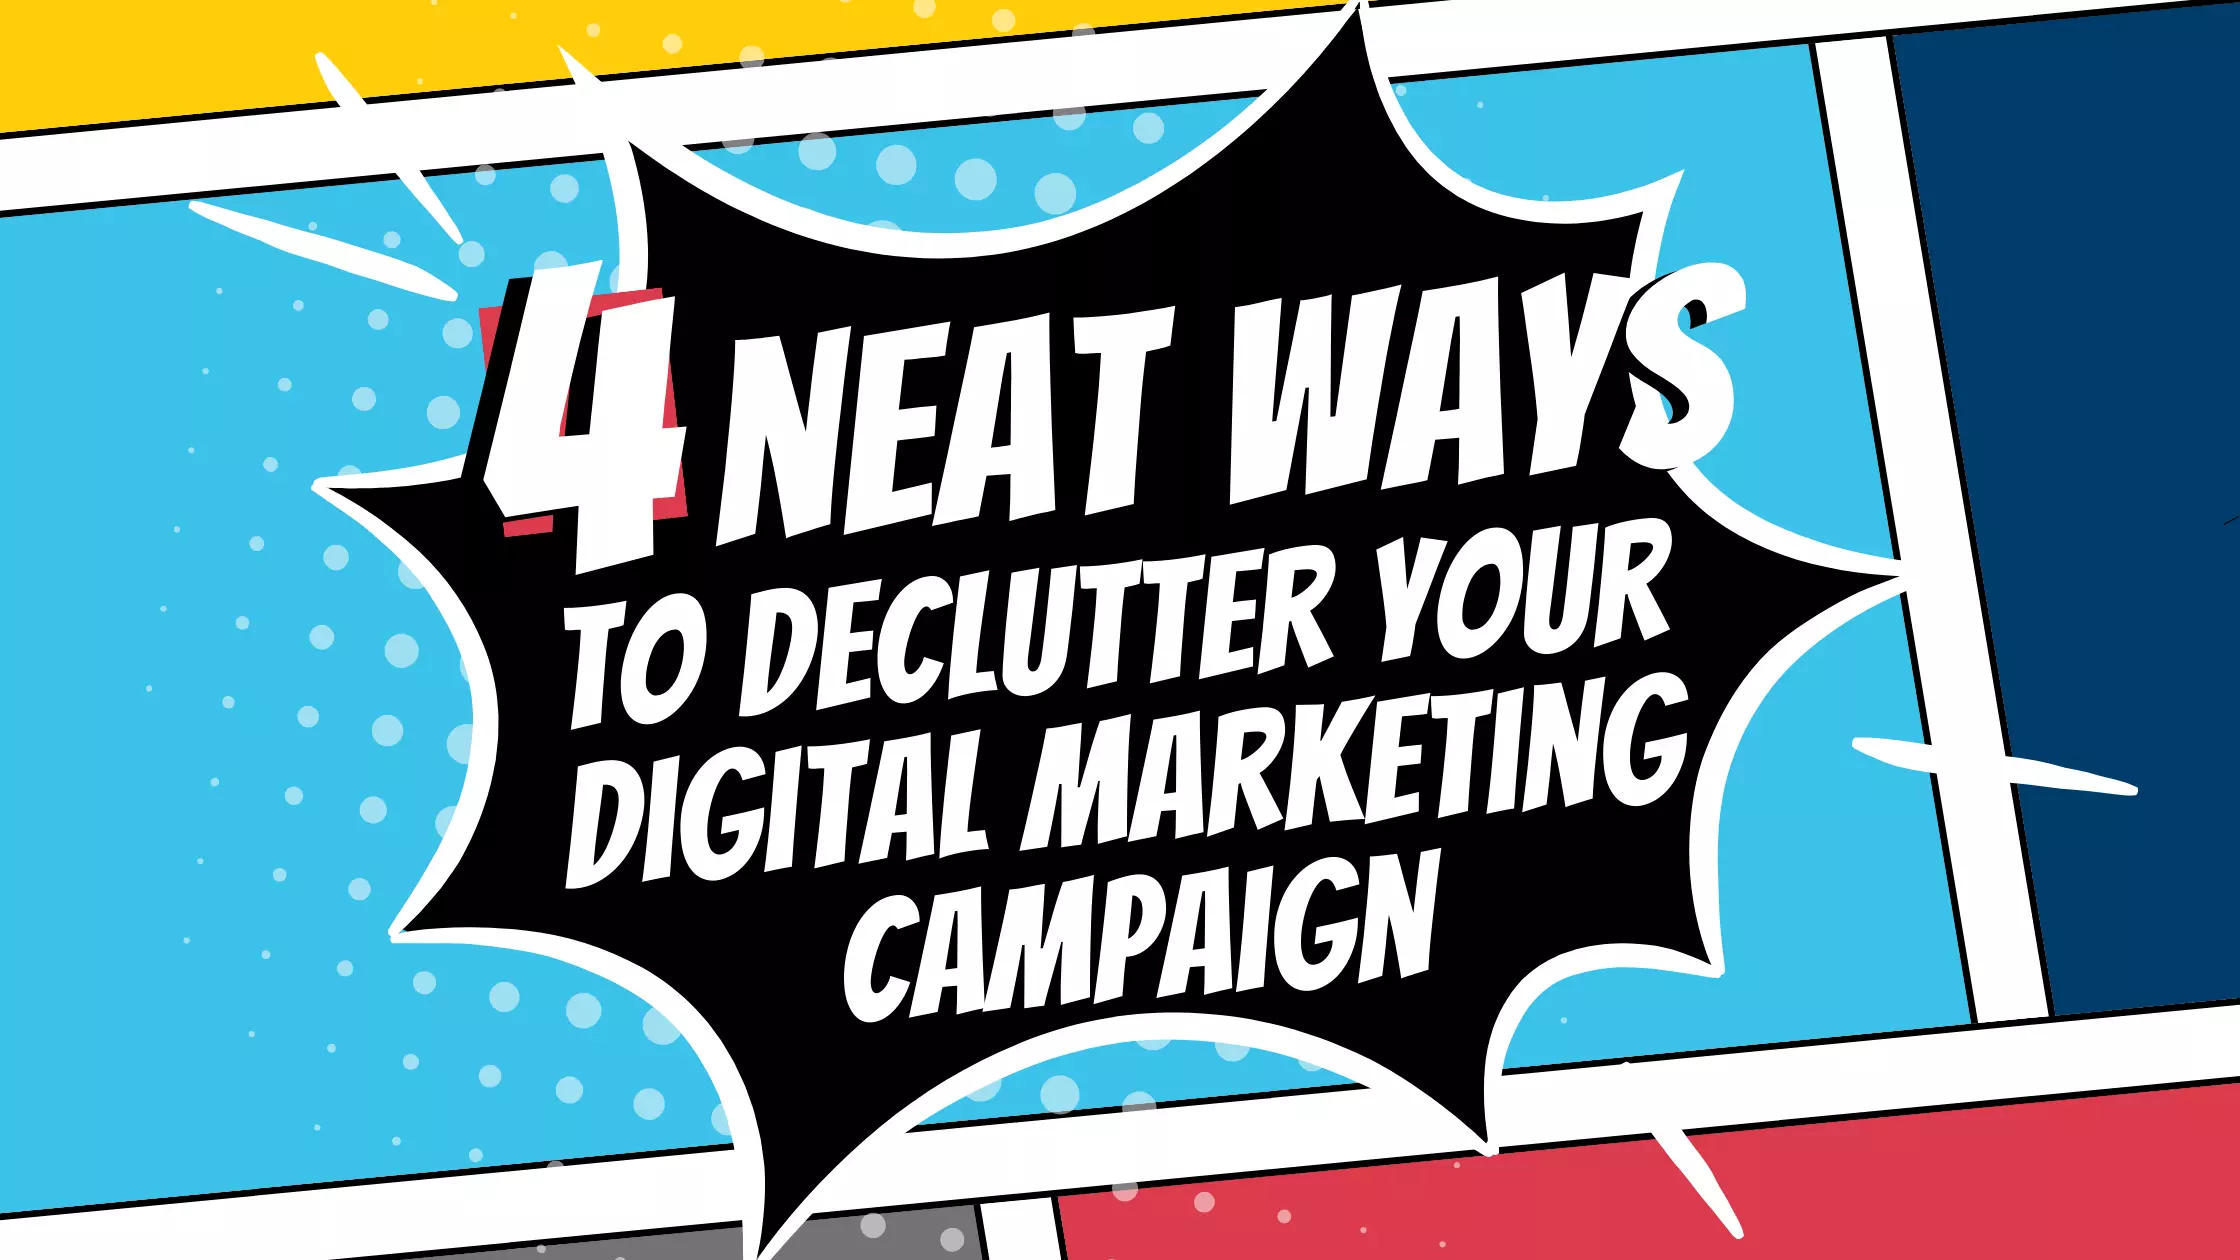 Comic panels that read 4 Neat Ways To Declutter Your Digital Marketing Campaign